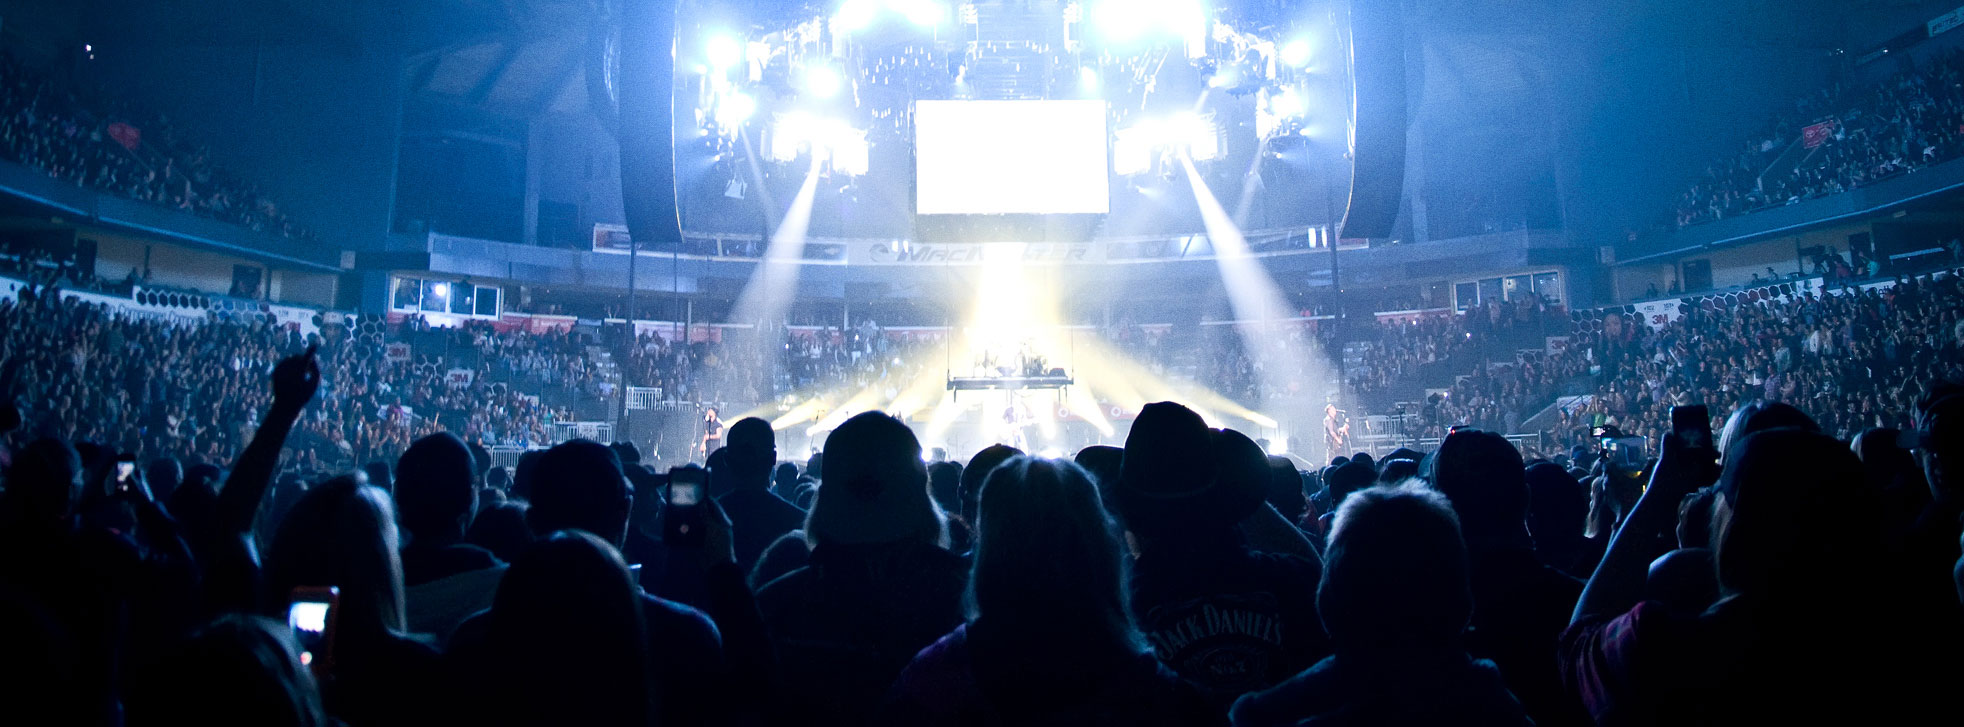 audience view of music stage at budweiser gardens